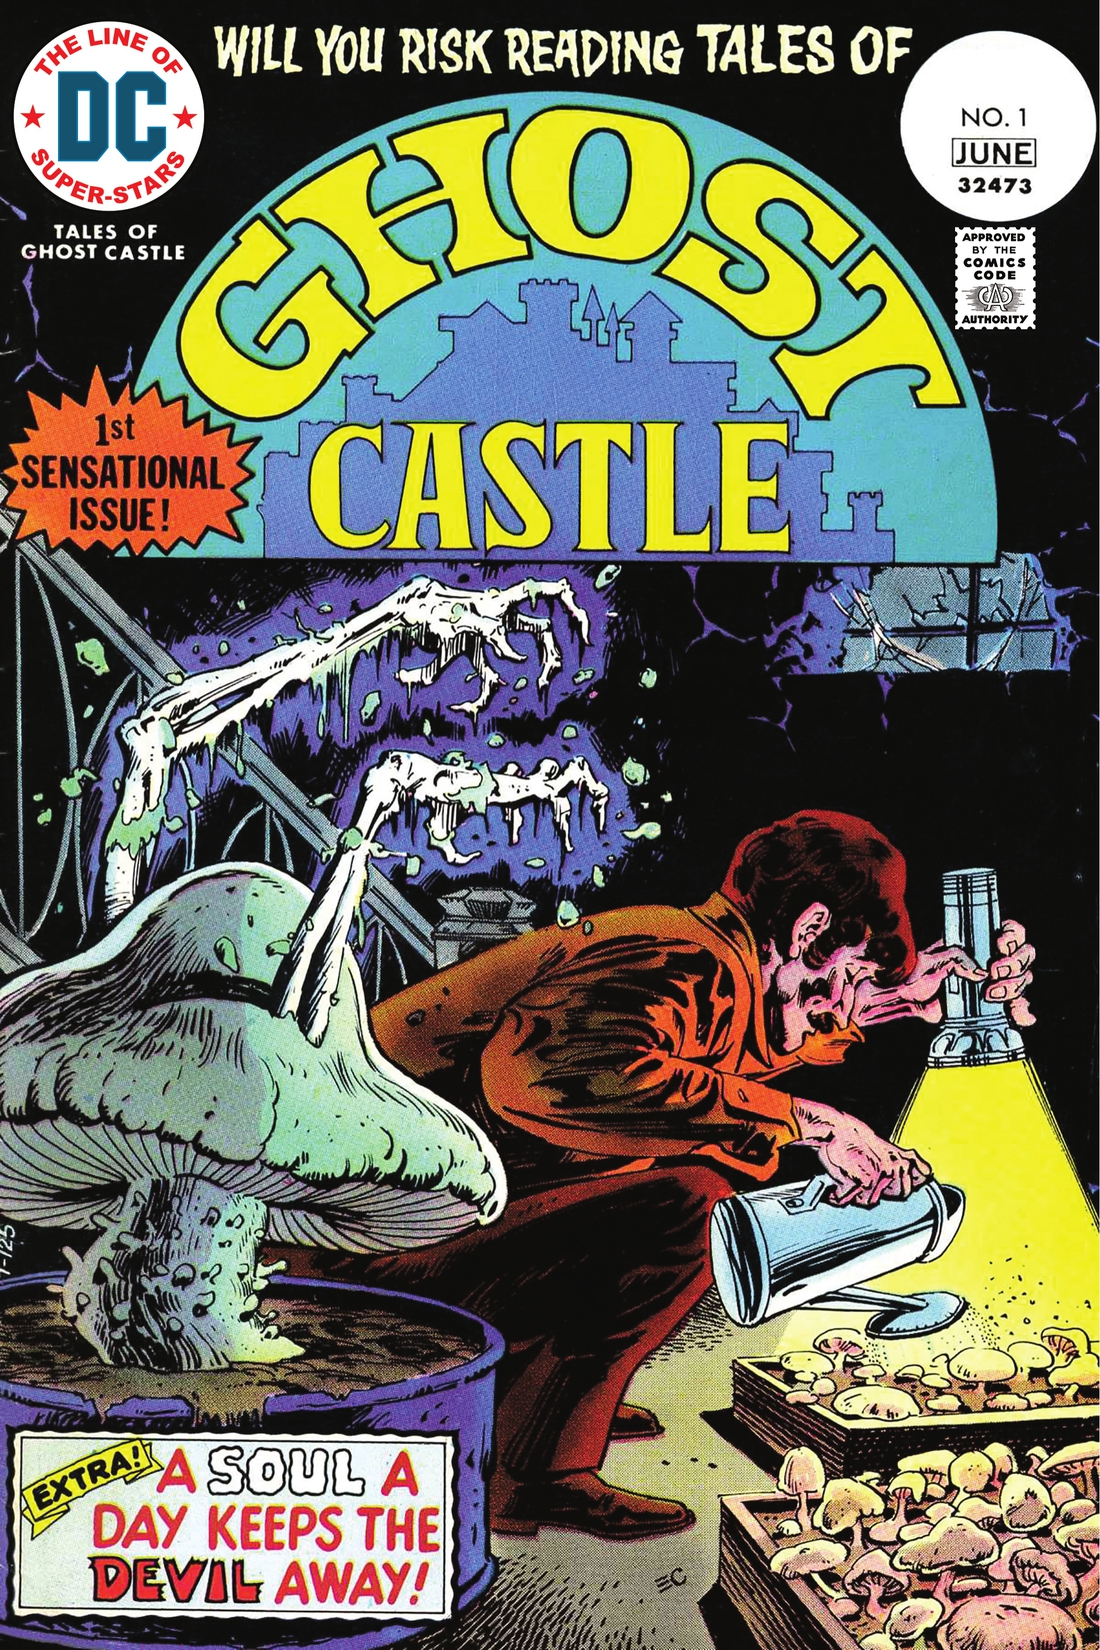 Tales of Ghost Castle #1 preview images